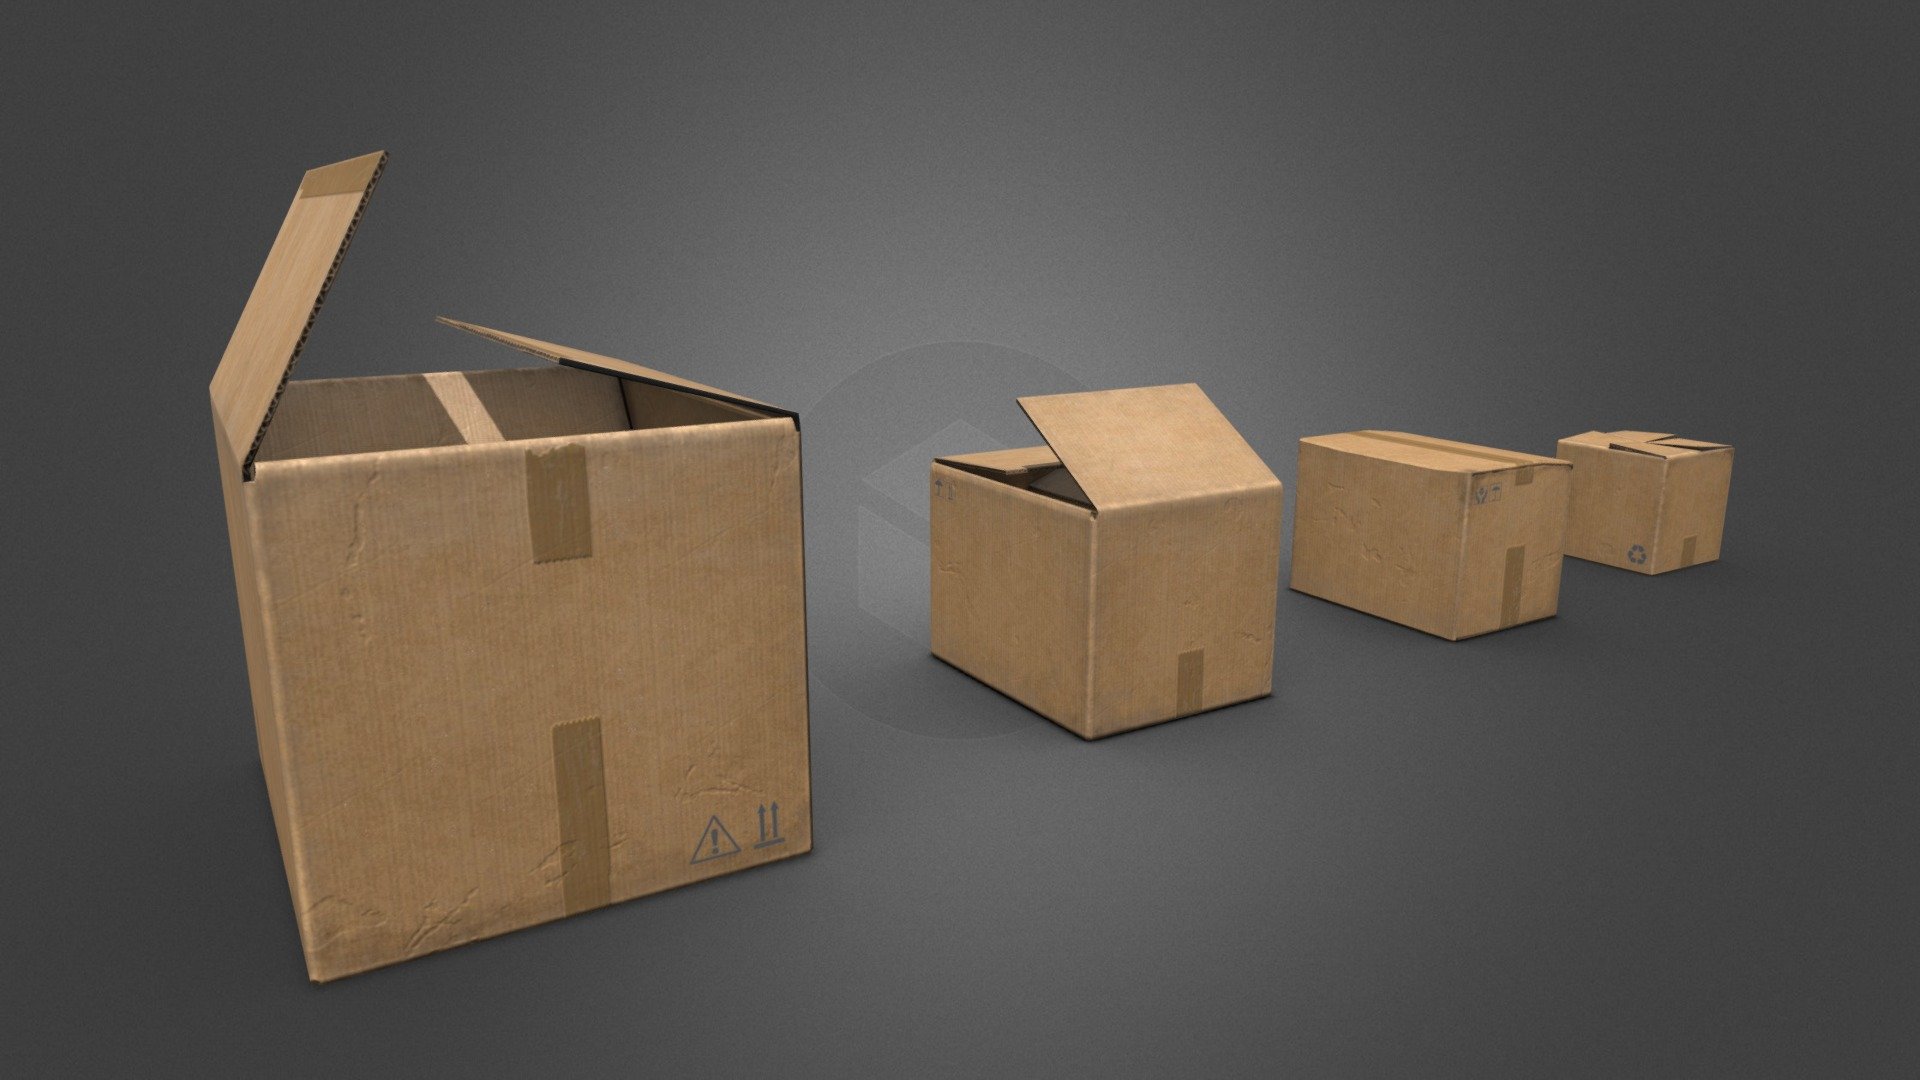 Four Cardboard Boxes